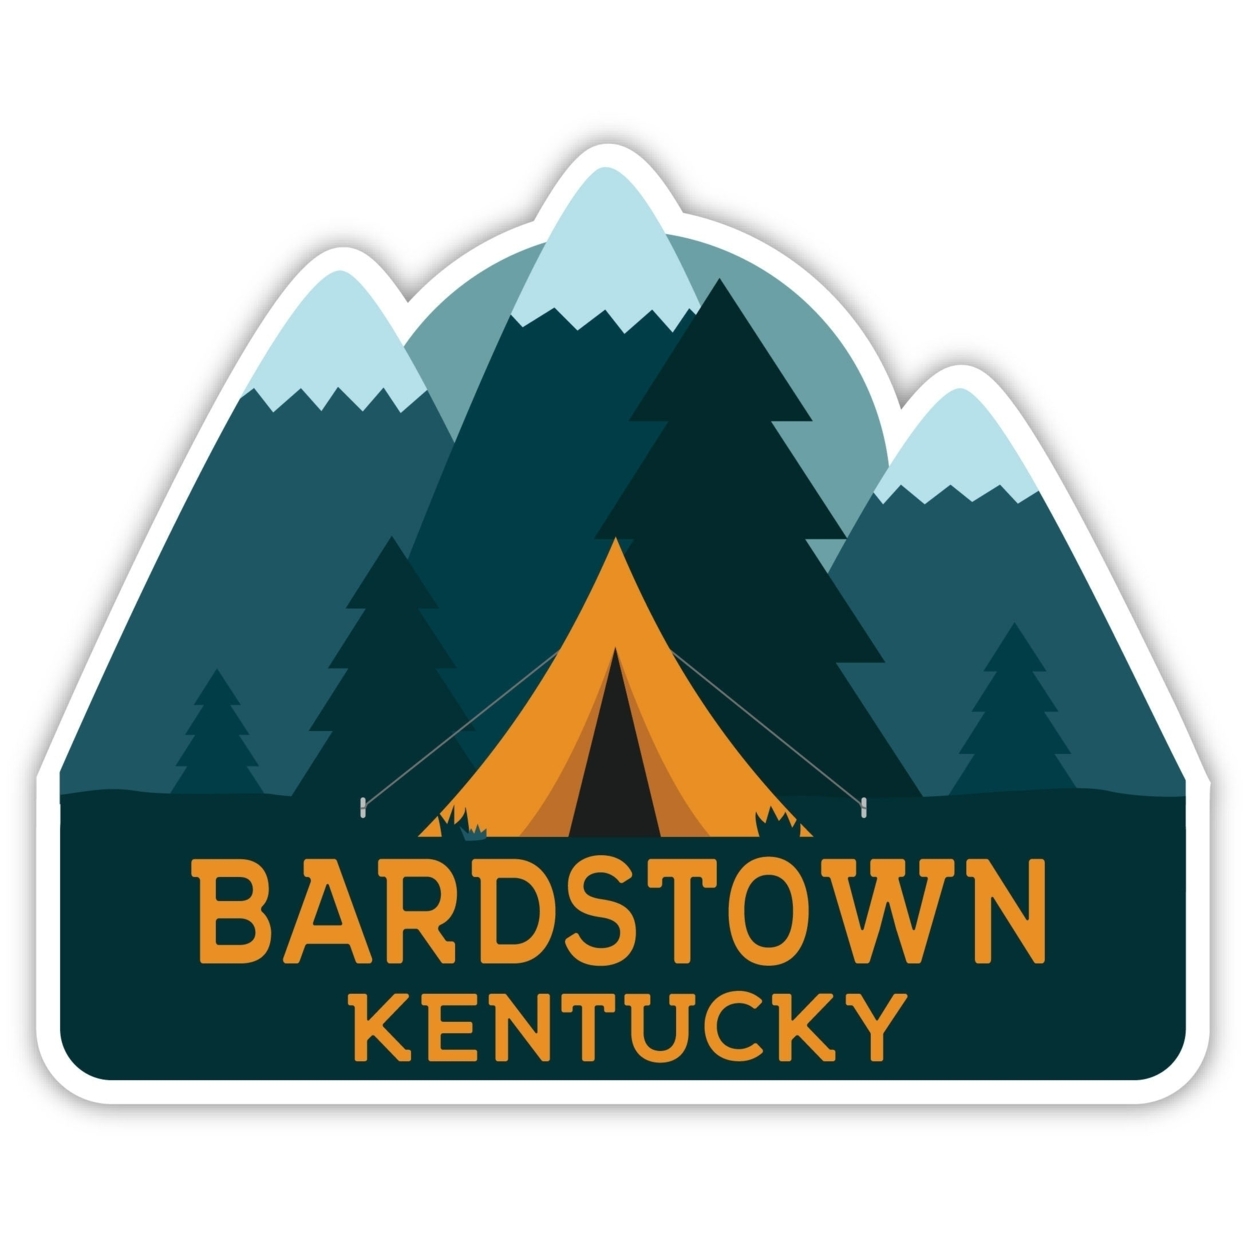 Bardstown Kentucky Souvenir Decorative Stickers (Choose Theme And Size) - 4-Pack, 6-Inch, Tent